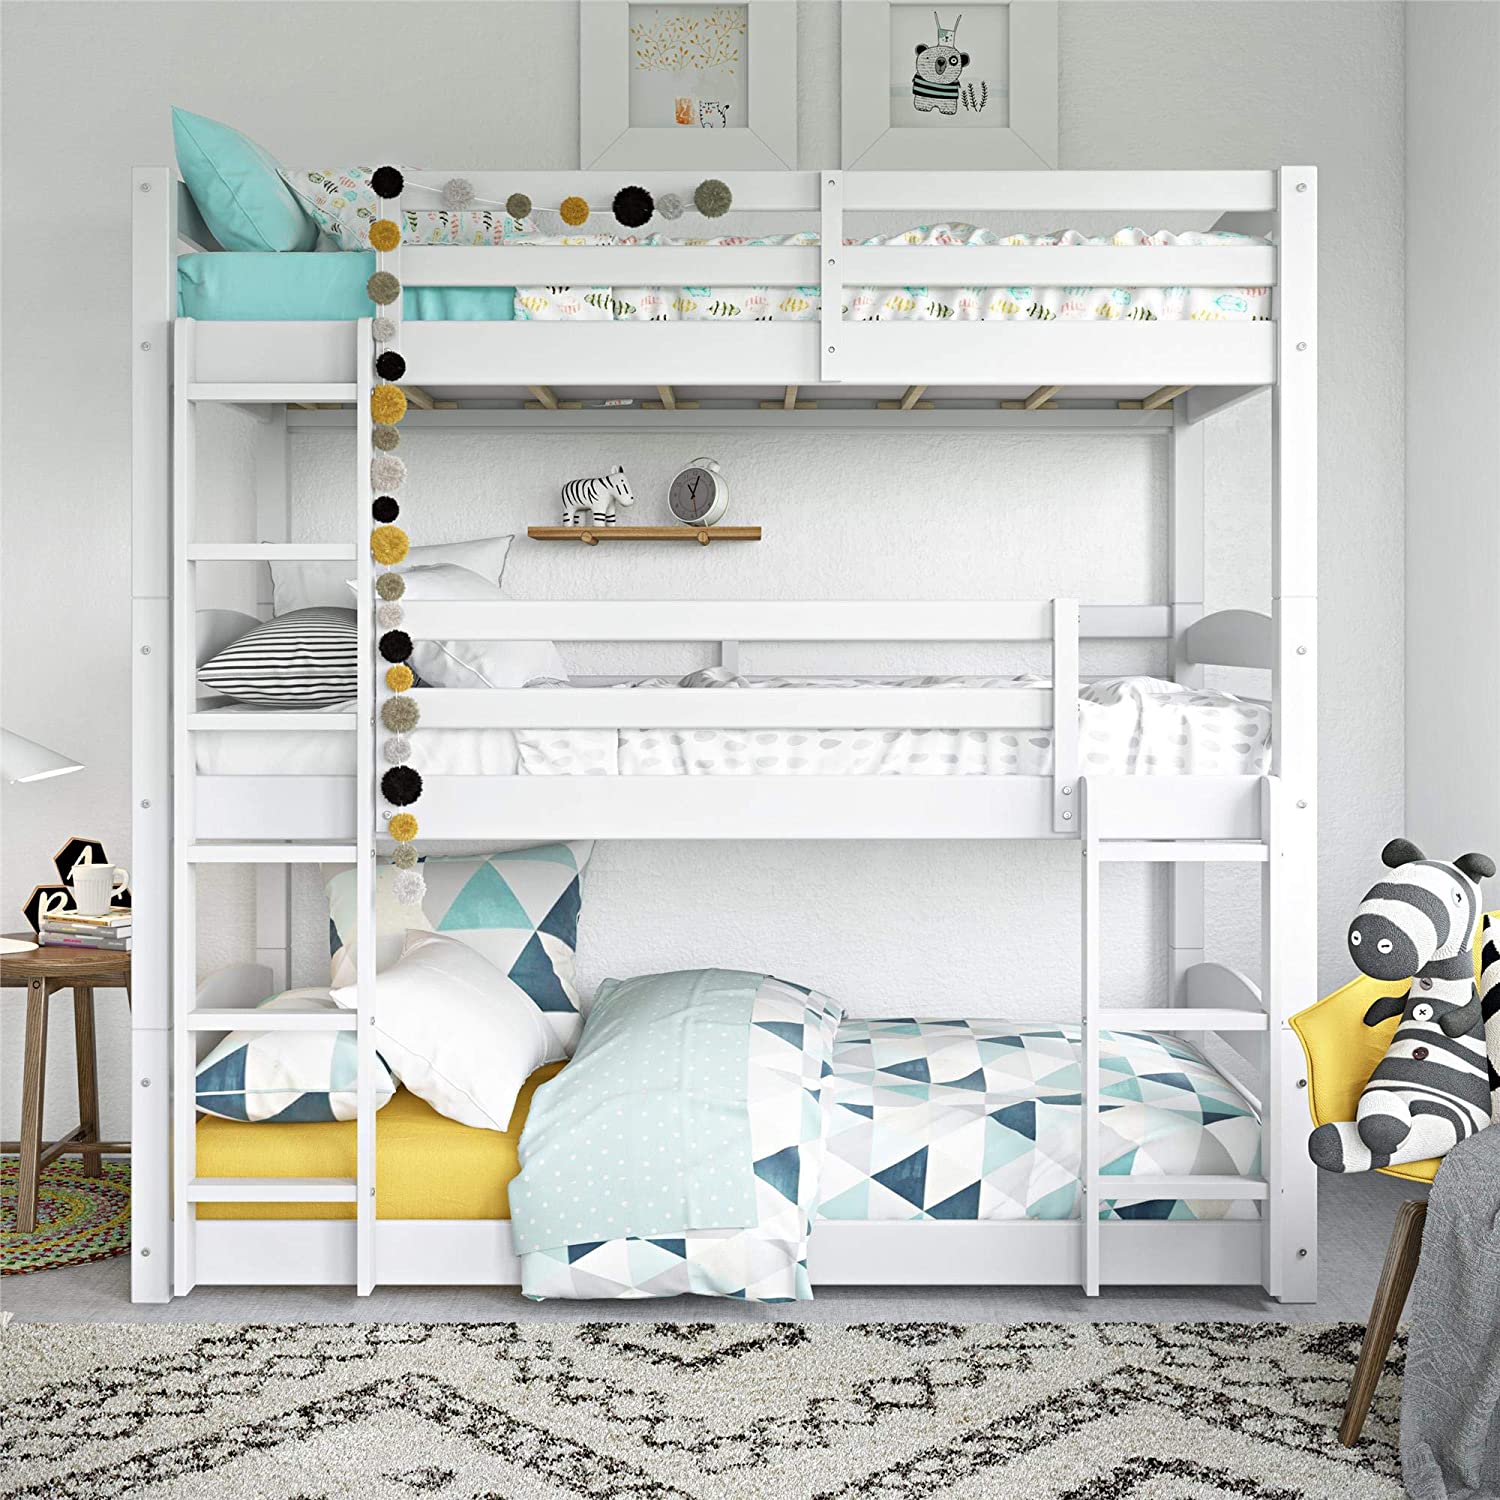 26 Bunk Beds You Ll Want For Yourself, Bunk Beds For Preschoolers